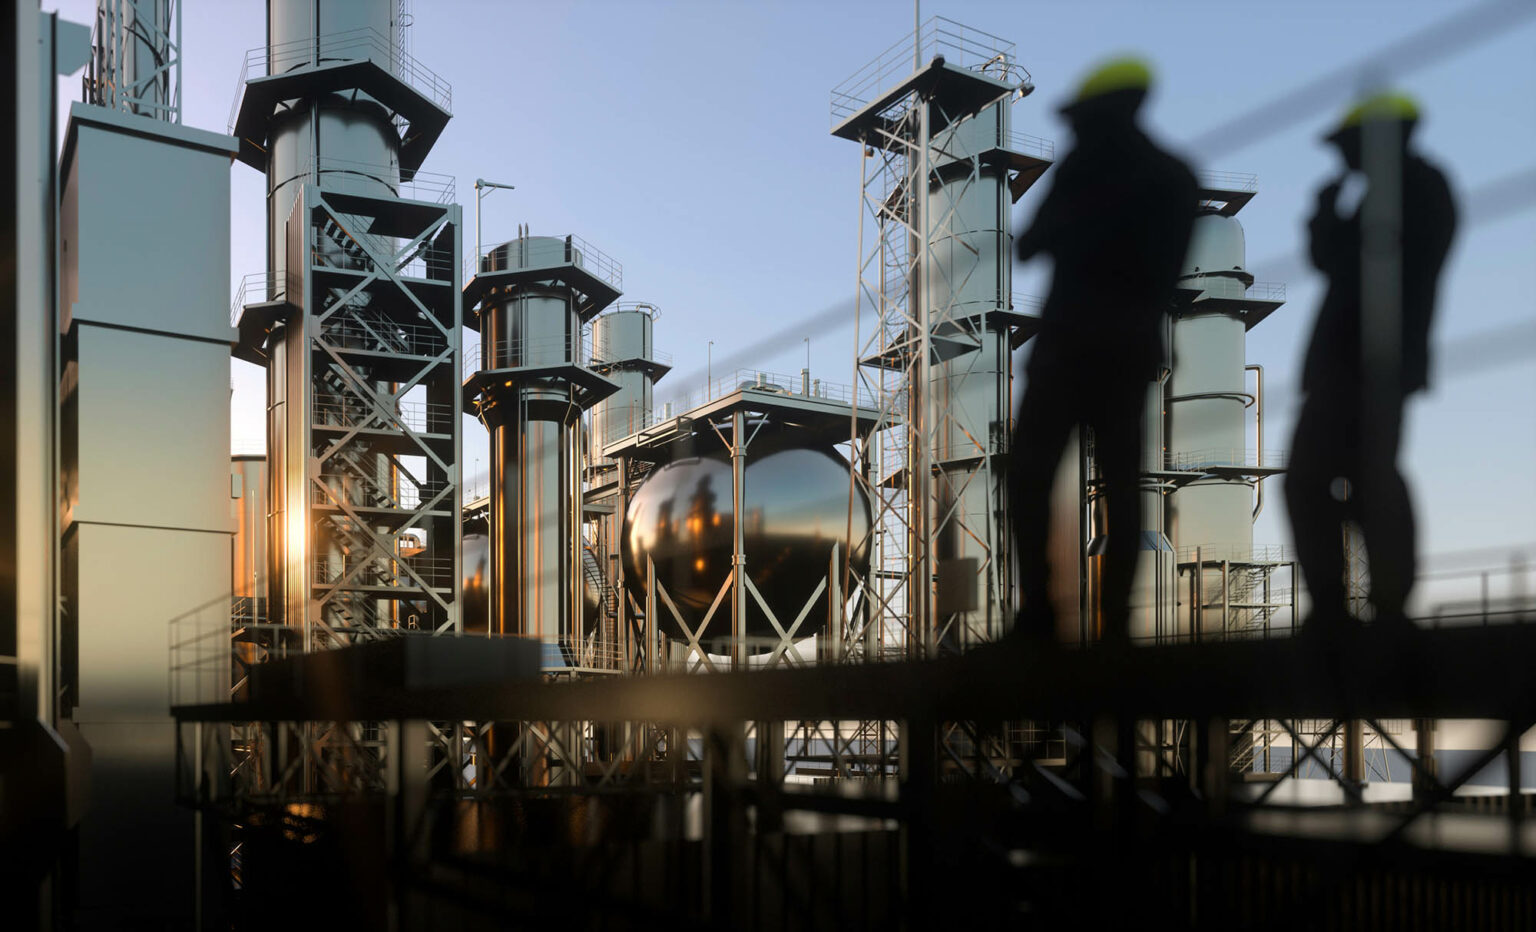 Wide exterior view of a large structural engineering job with workers blurred in the foreground